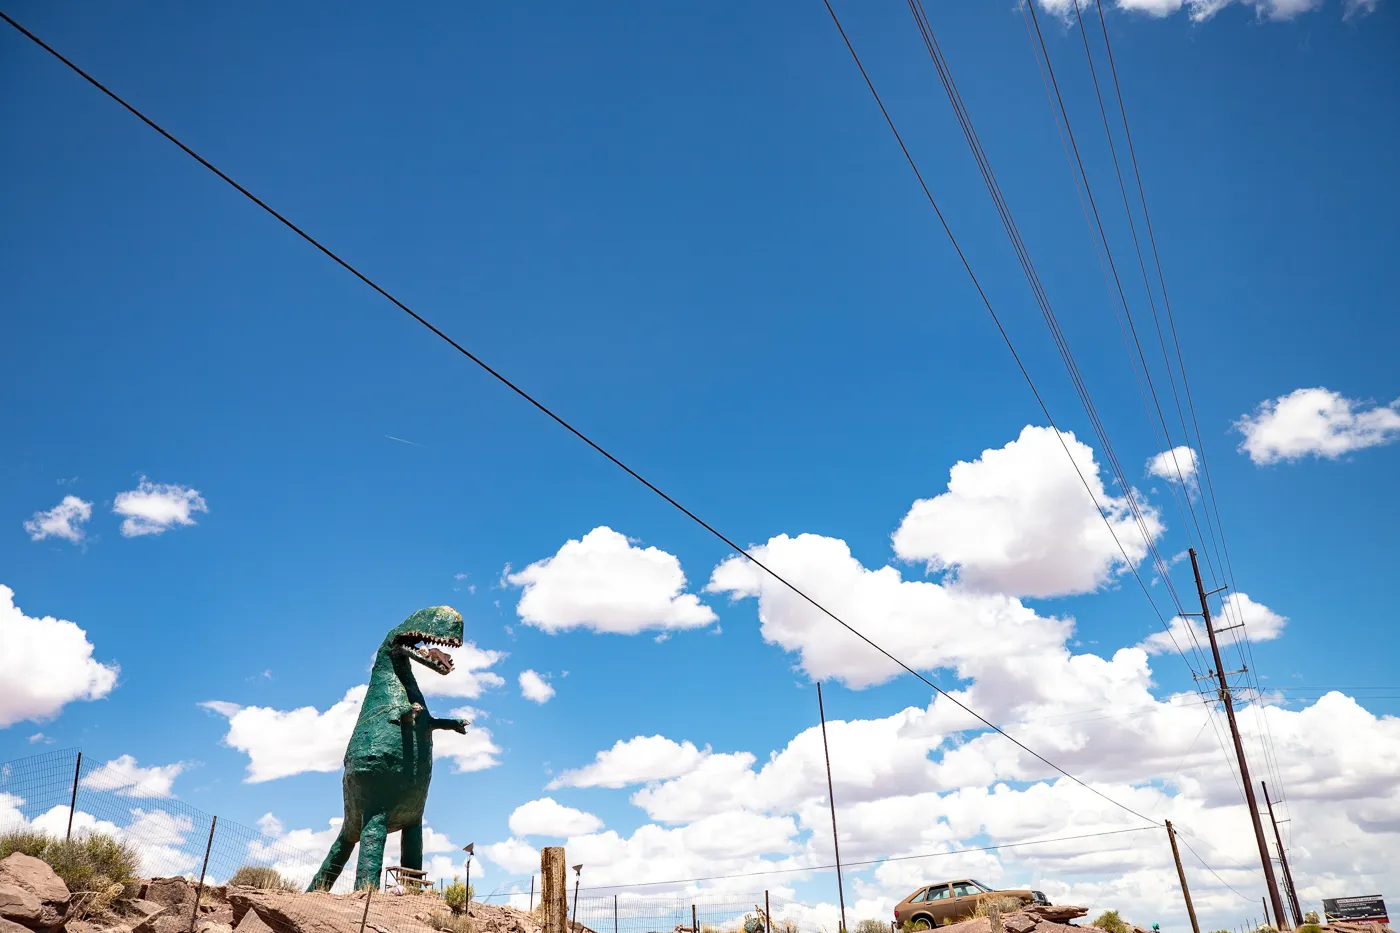 Giant dinosaur eating a woman at Stewart's Petrified Wood in Holbrook, Arizona Route 66 Roadside Attraction